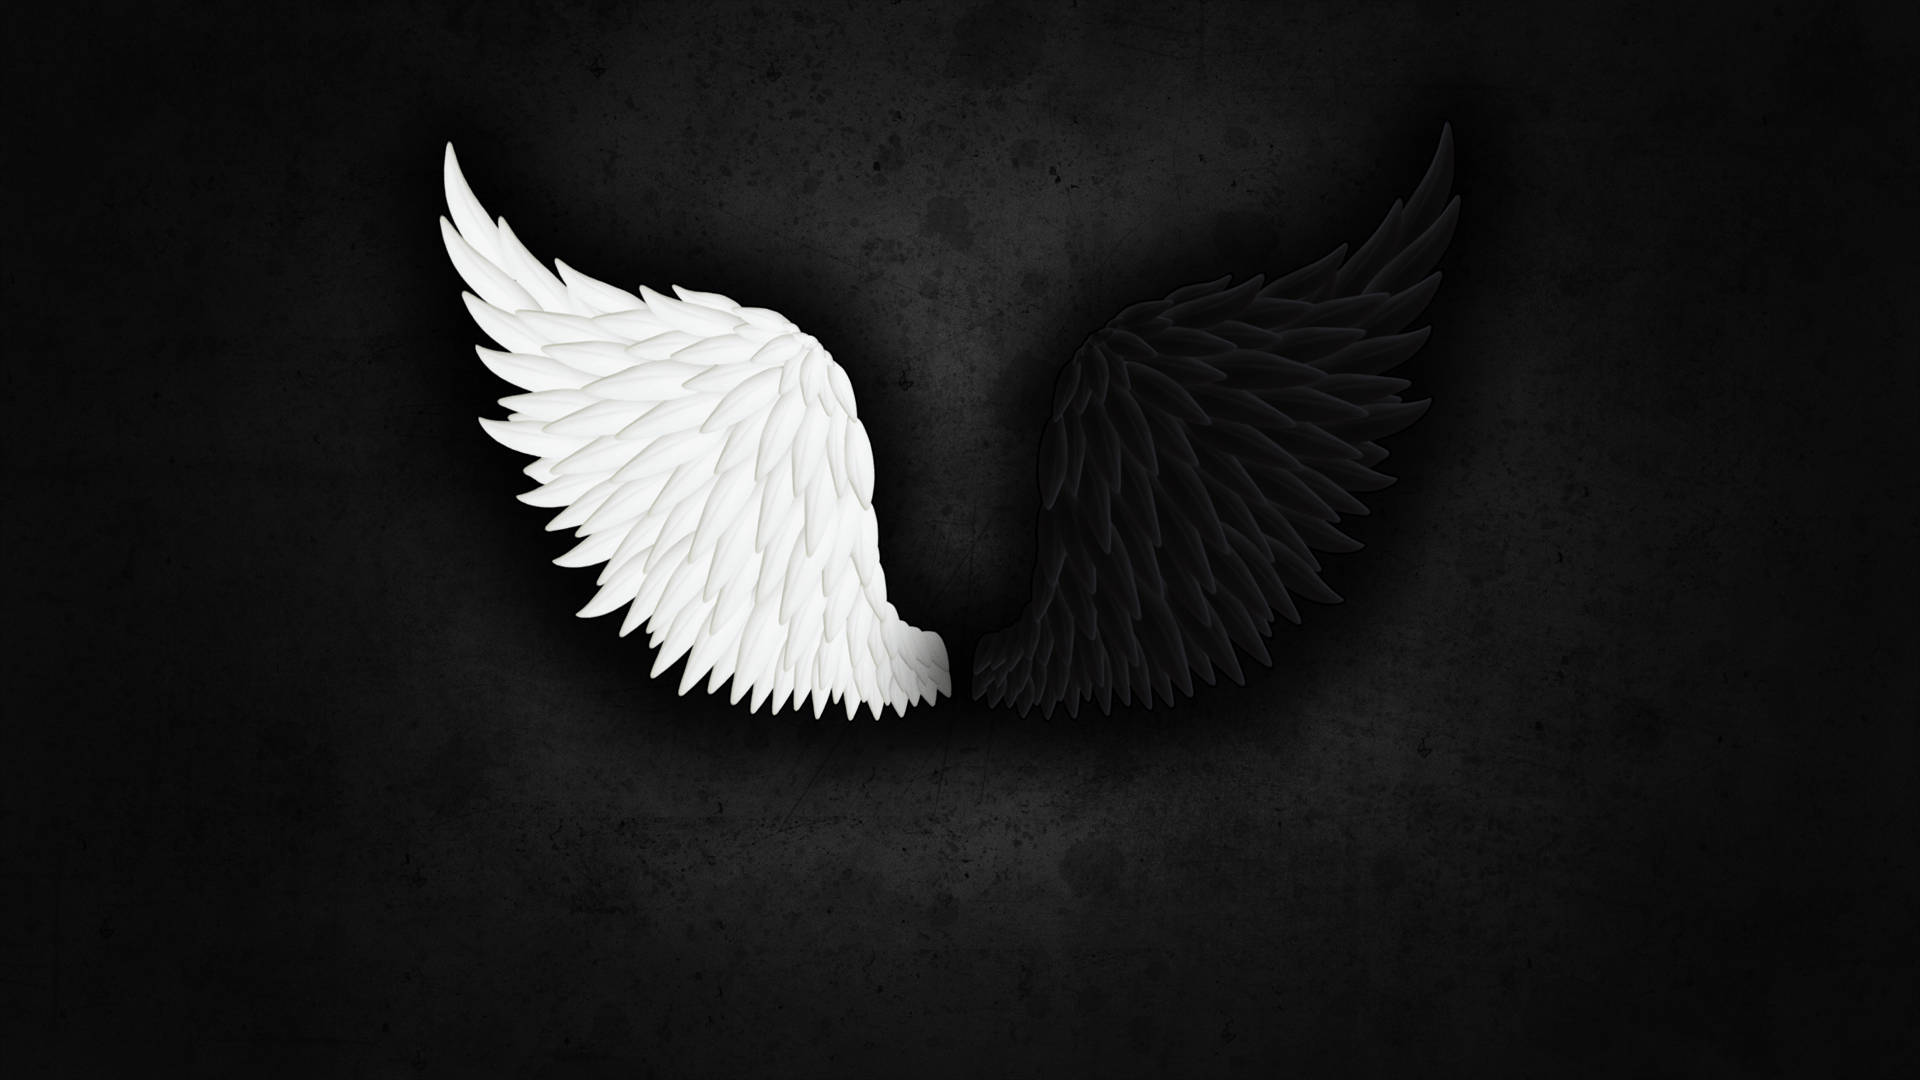 Black and white angel wings on a dark background - Wings